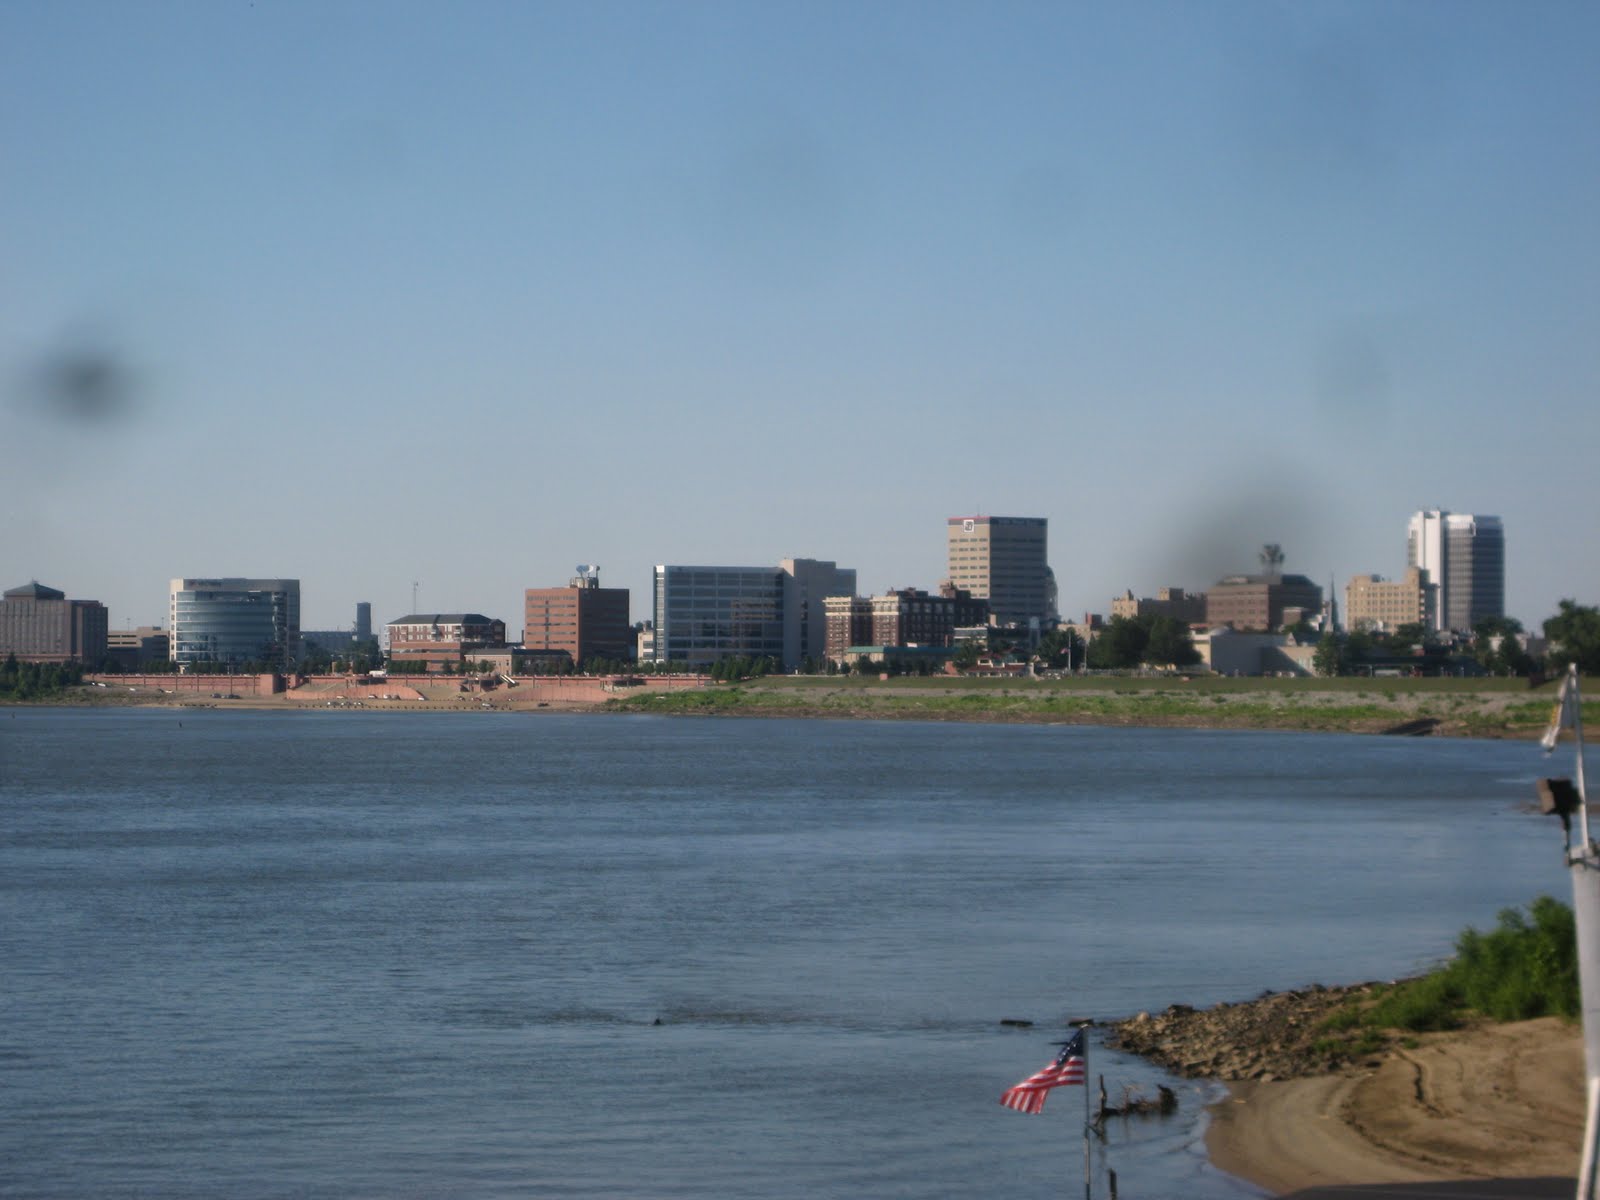 Evansville, IN as seen from land above the fuel dock.